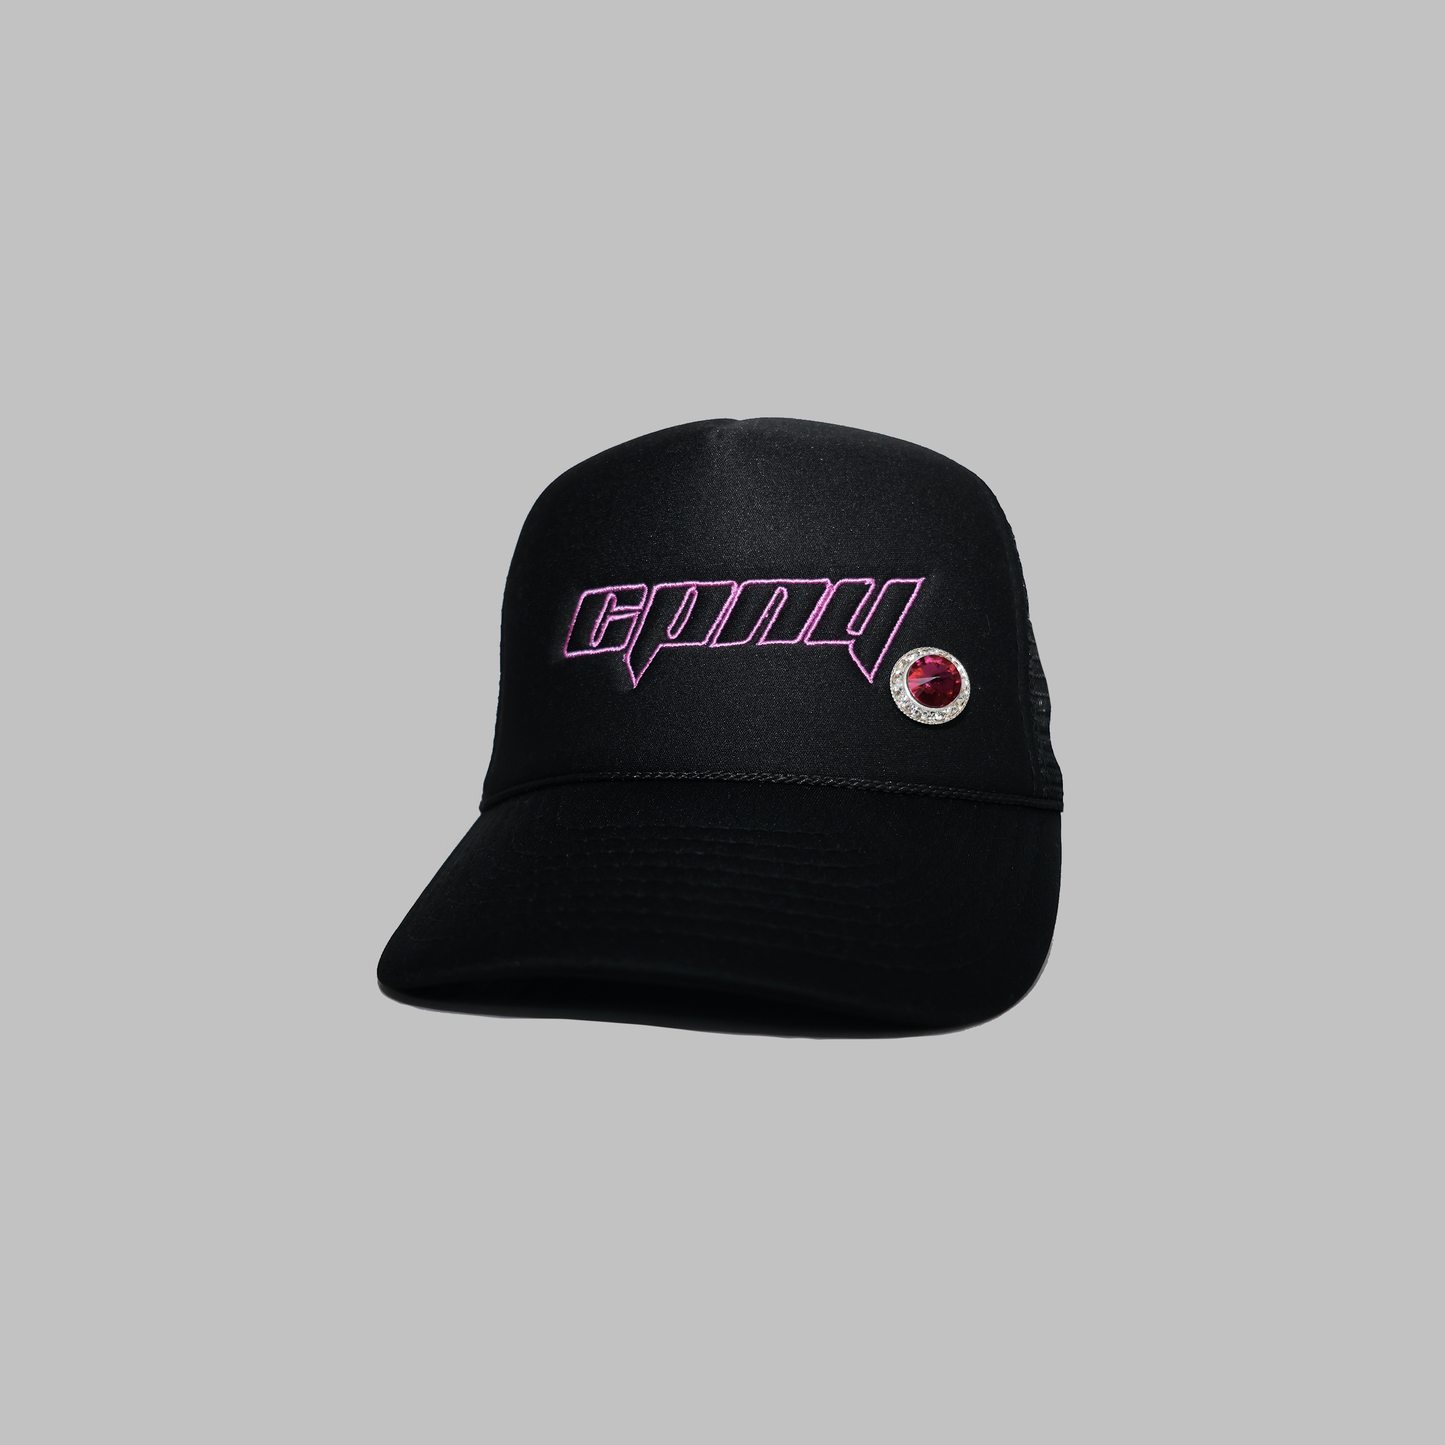 Click For Options on Trucker Hats